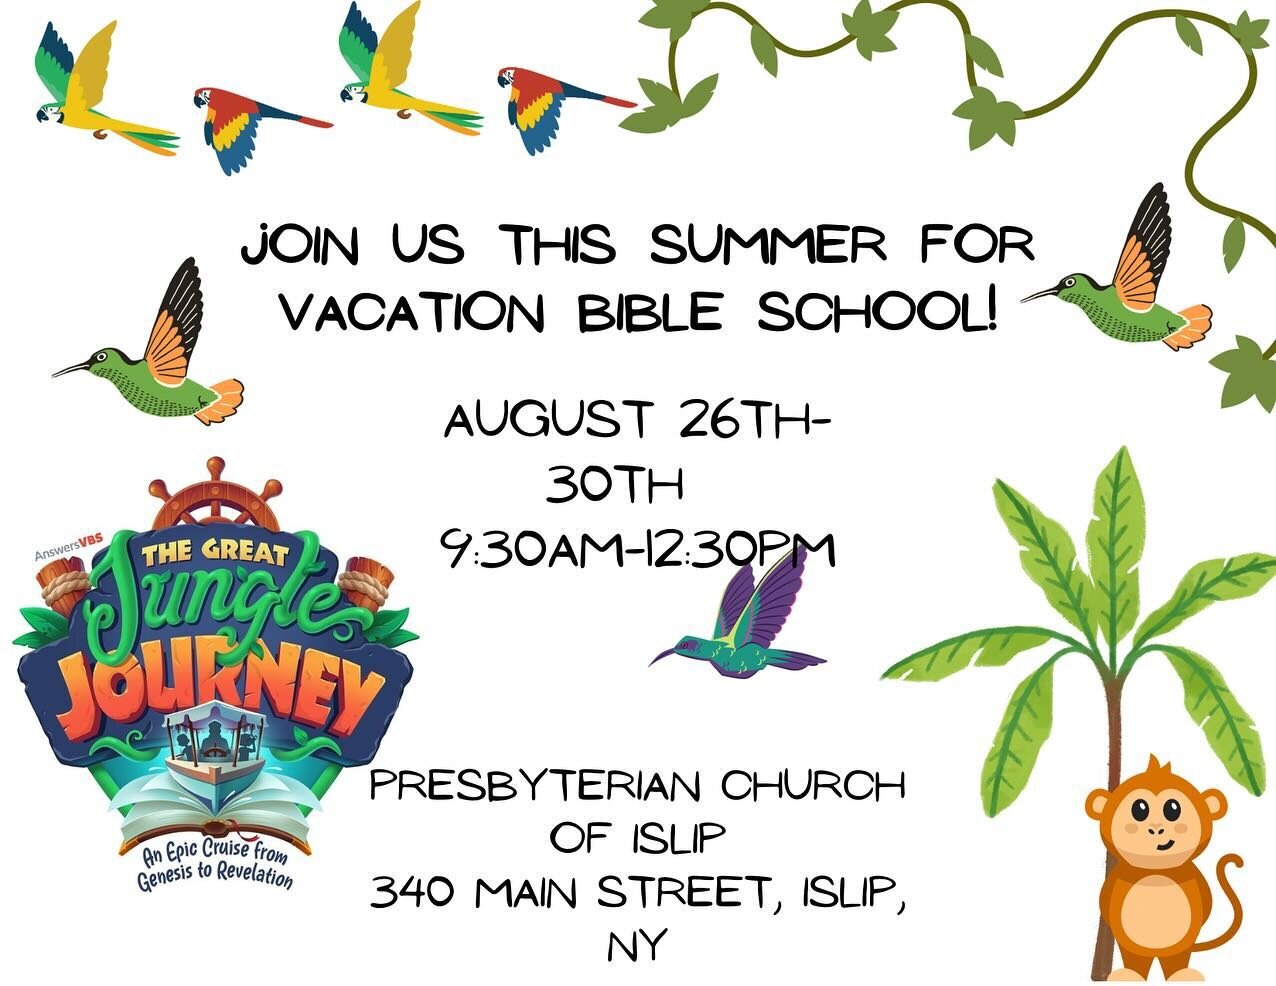 Even though it feels like winter ❄️ summer ☀️ is just around the corner. With summer comes VACATION BIBLE SCHOOL! Join us this year, ages 4-entering 5th grade are all welcomed!